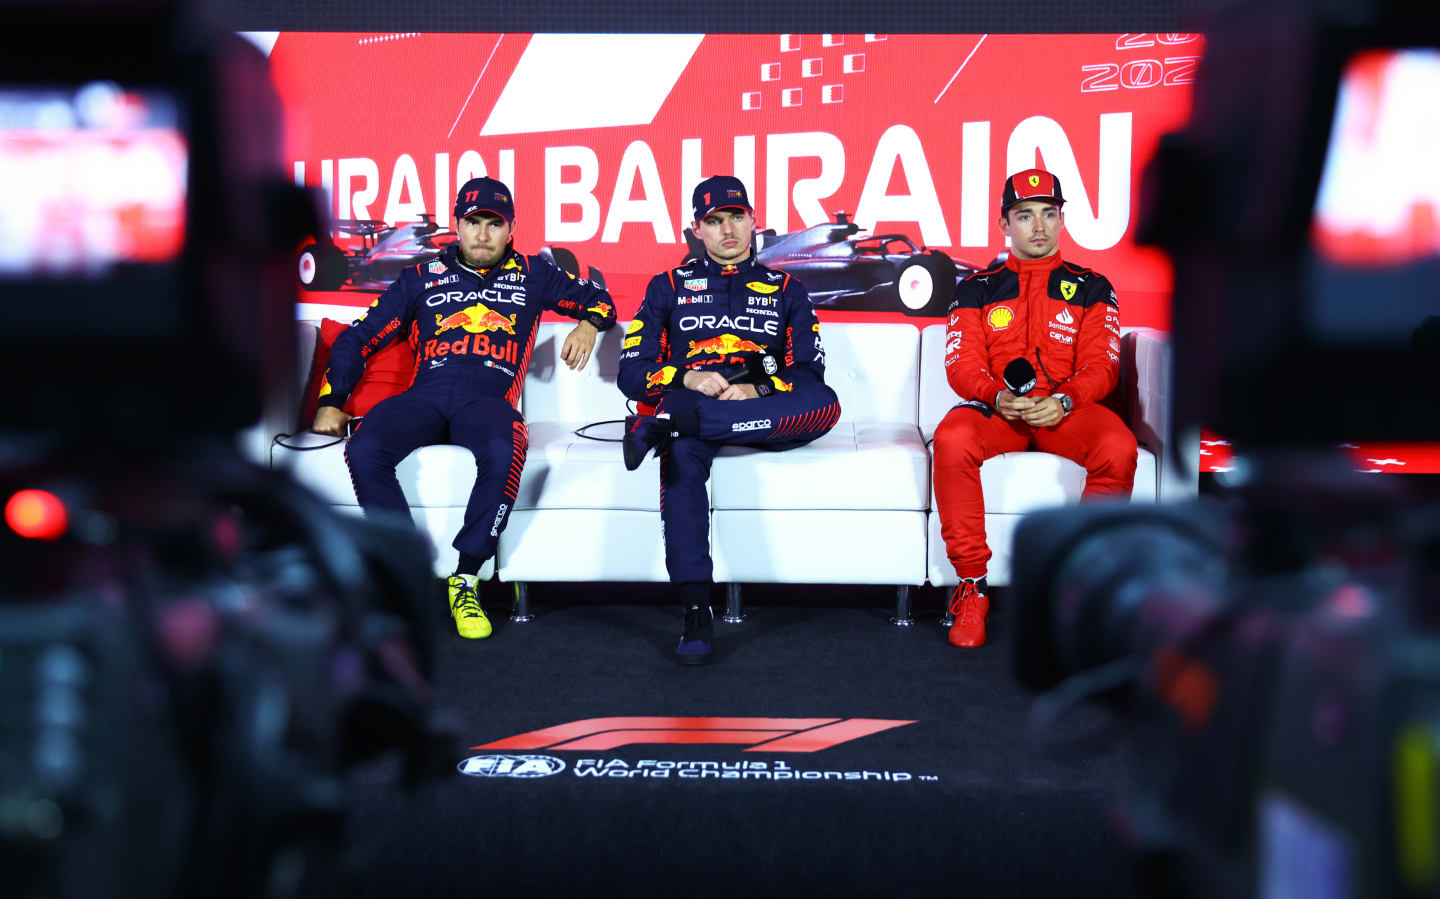 BAHRAIN, BAHRAIN - MARCH 04: Pole position qualifier Max Verstappen of the Netherlands and Oracle Red Bull Racing (C), Second placed qualifier Sergio Perez of Mexico and Oracle Red Bull Racing (L) and Third placed qualifier Charles Leclerc of Monaco and Ferrari (R) attend the press conference after qualifying ahead of the F1 Grand Prix of Bahrain at Bahrain International Circuit on March 04, 2023 in Bahrain, Bahrain. (Photo by Dan Istitene/Getty Images)